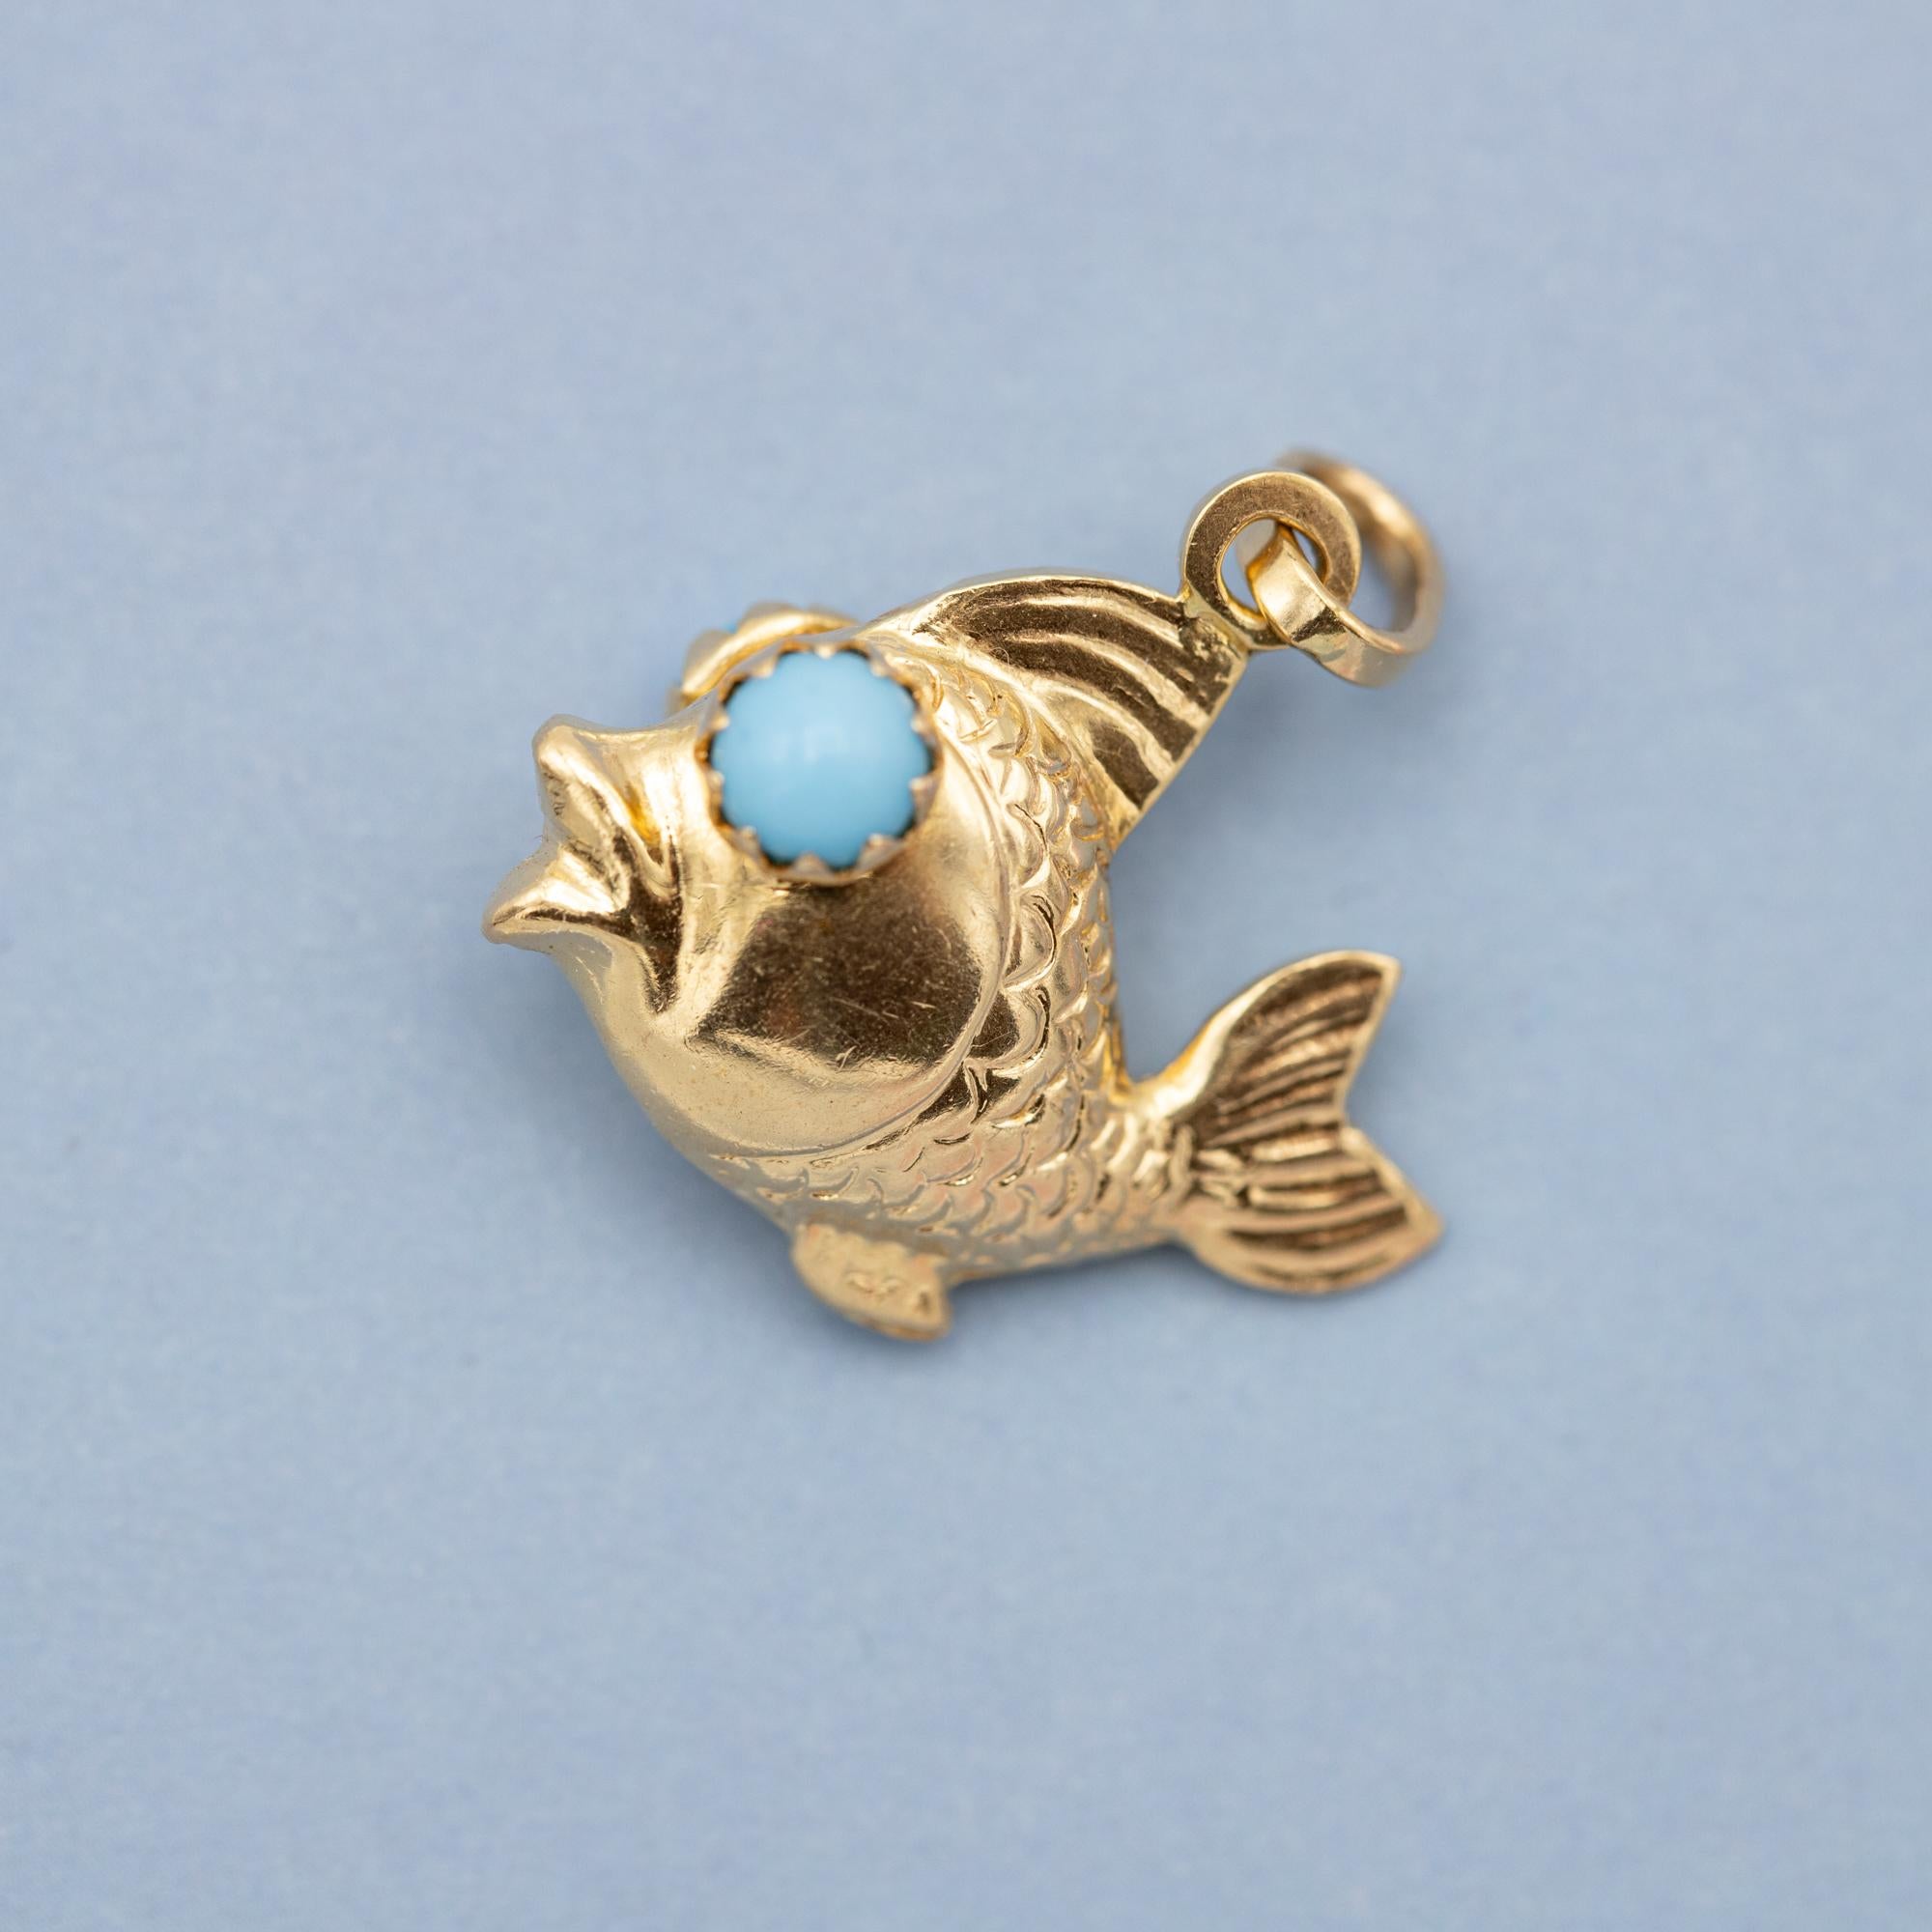 For sale is this vintage fish charm crafted in 18 ct yellow gold. This lovely charm is hallmarked with a 750 mark and an Italian hallmark from before 1970. It is well detailled and set with two cabochon shaped turquoise stones as eyes.

This cute